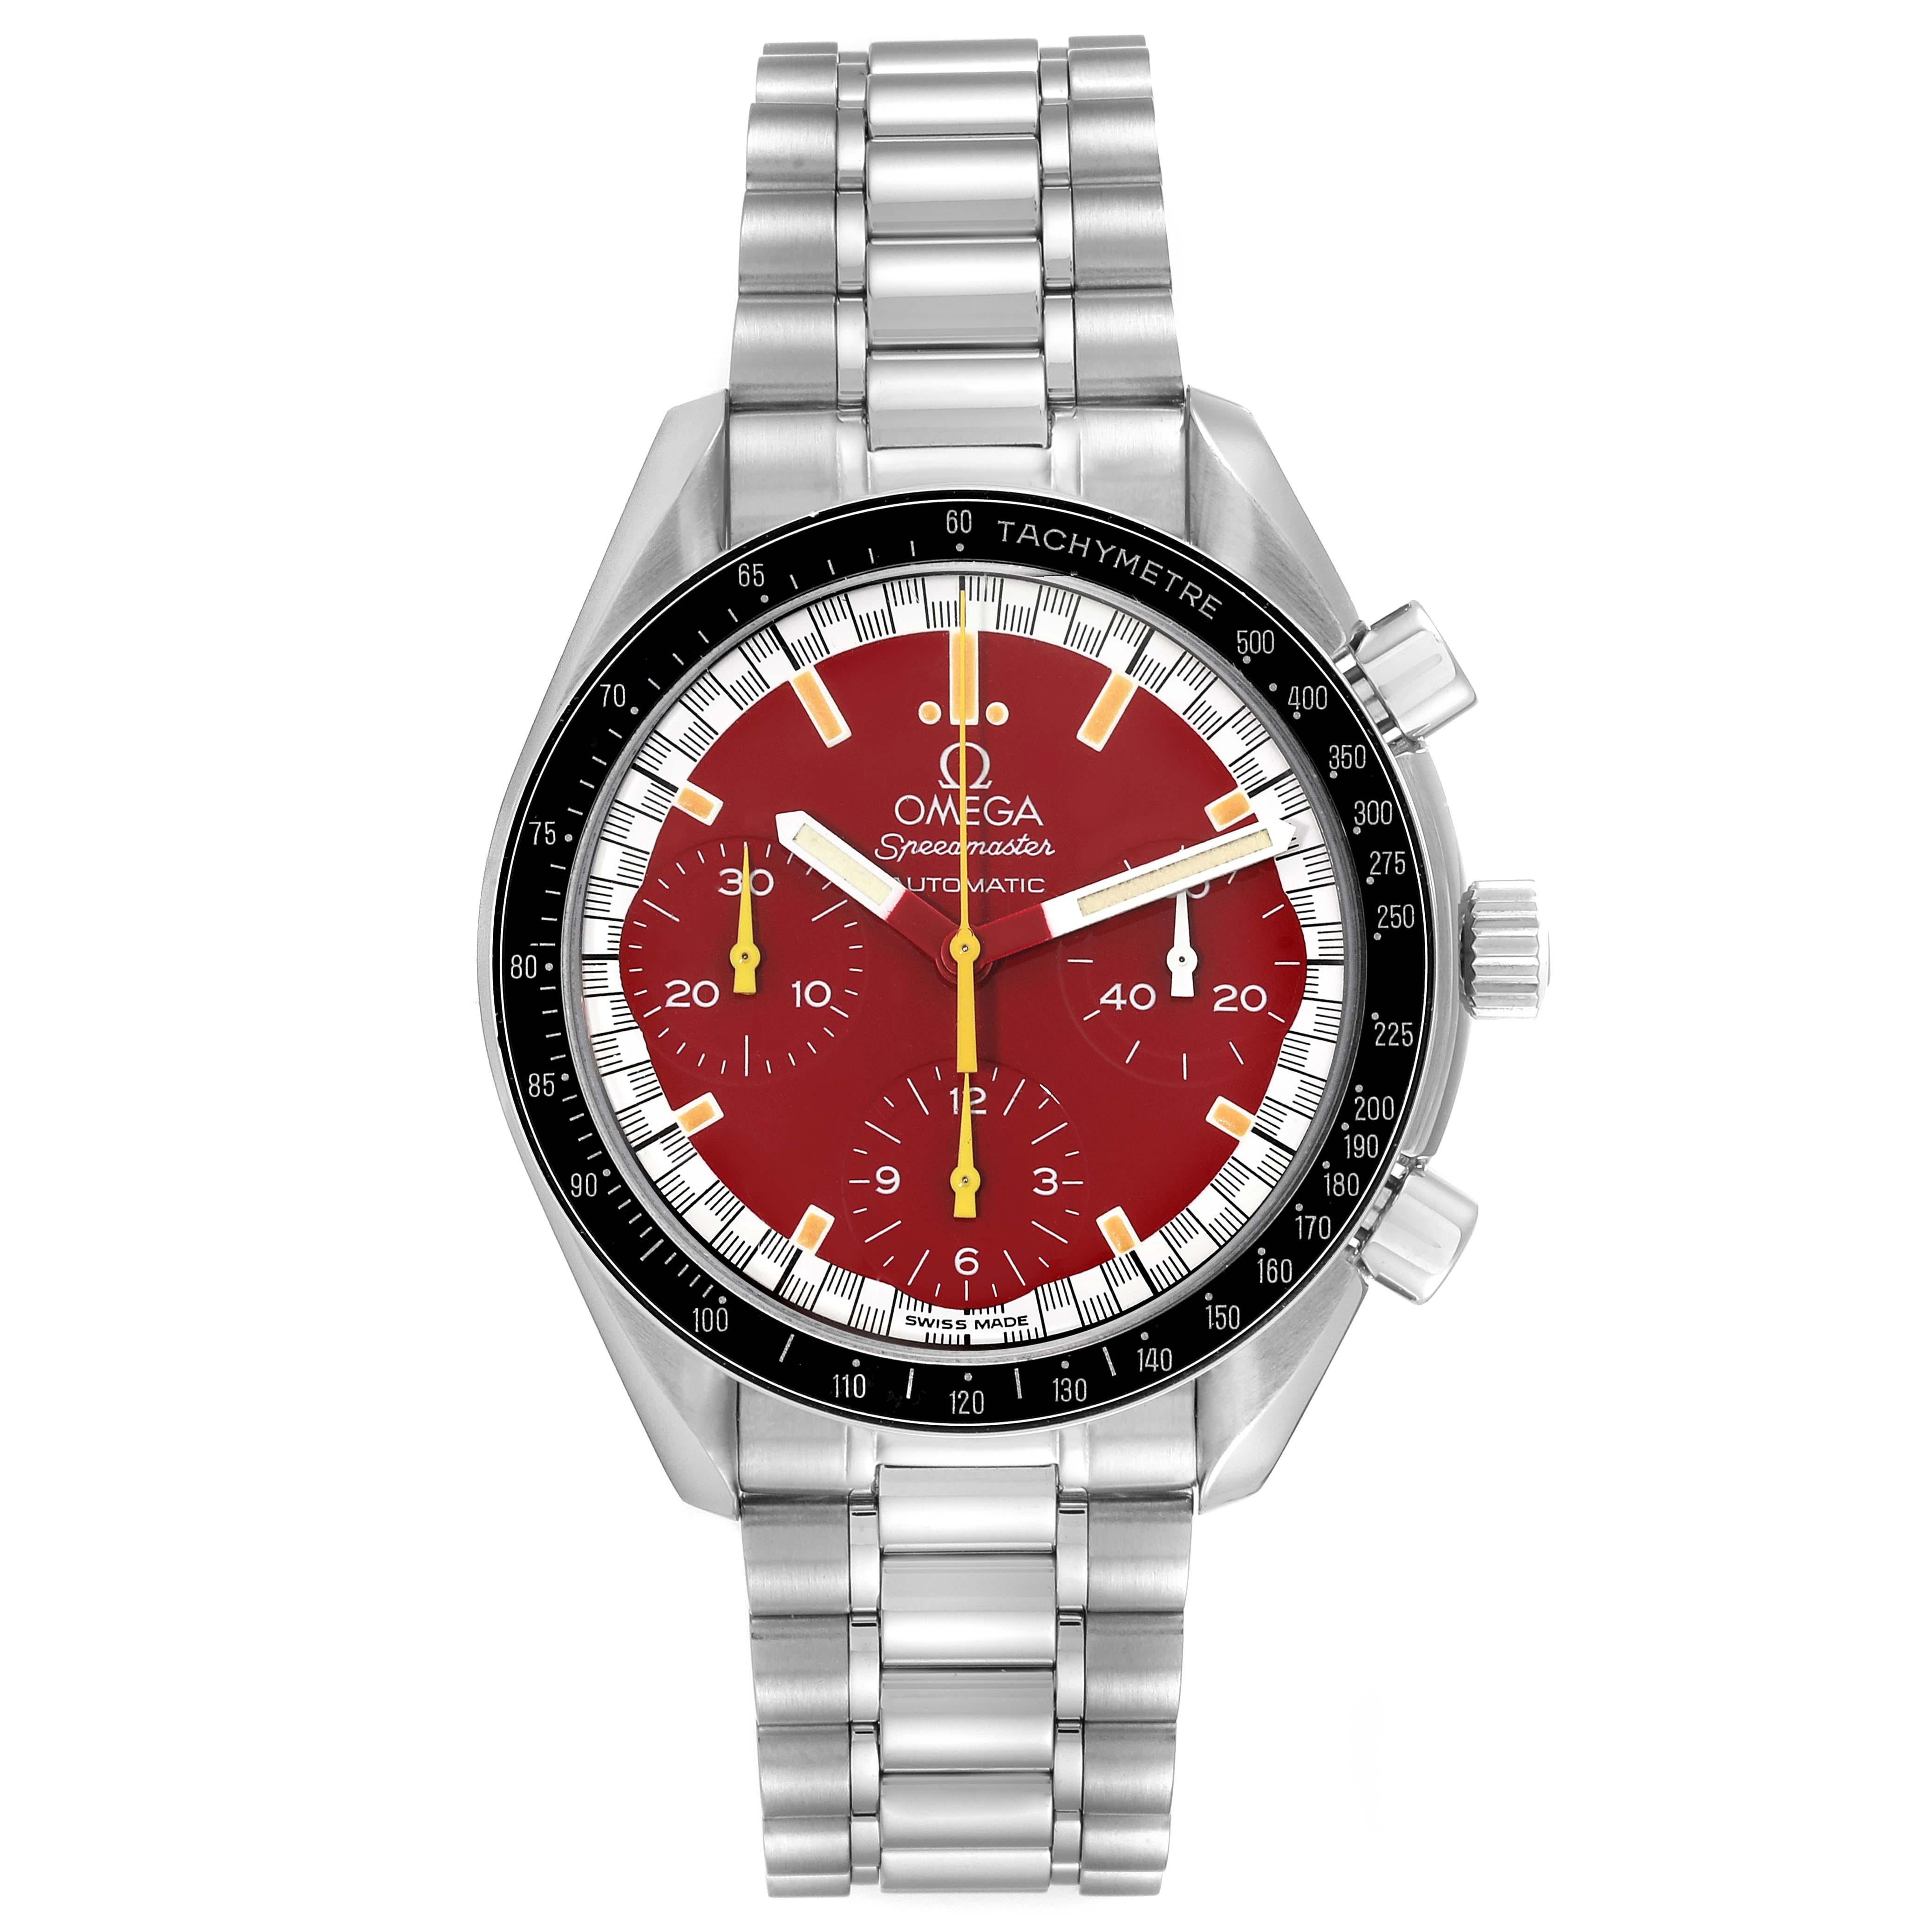 Omega Speedmaster Schumacher Red Dial Steel Mens Watch 3510.61.00 Box Card. Automatic self-winding chronograph movement. Stainless steel round case 39.0 mm in diameter. Black bezel with tachymetre function. Acrylic crystal. Red dial with luminous